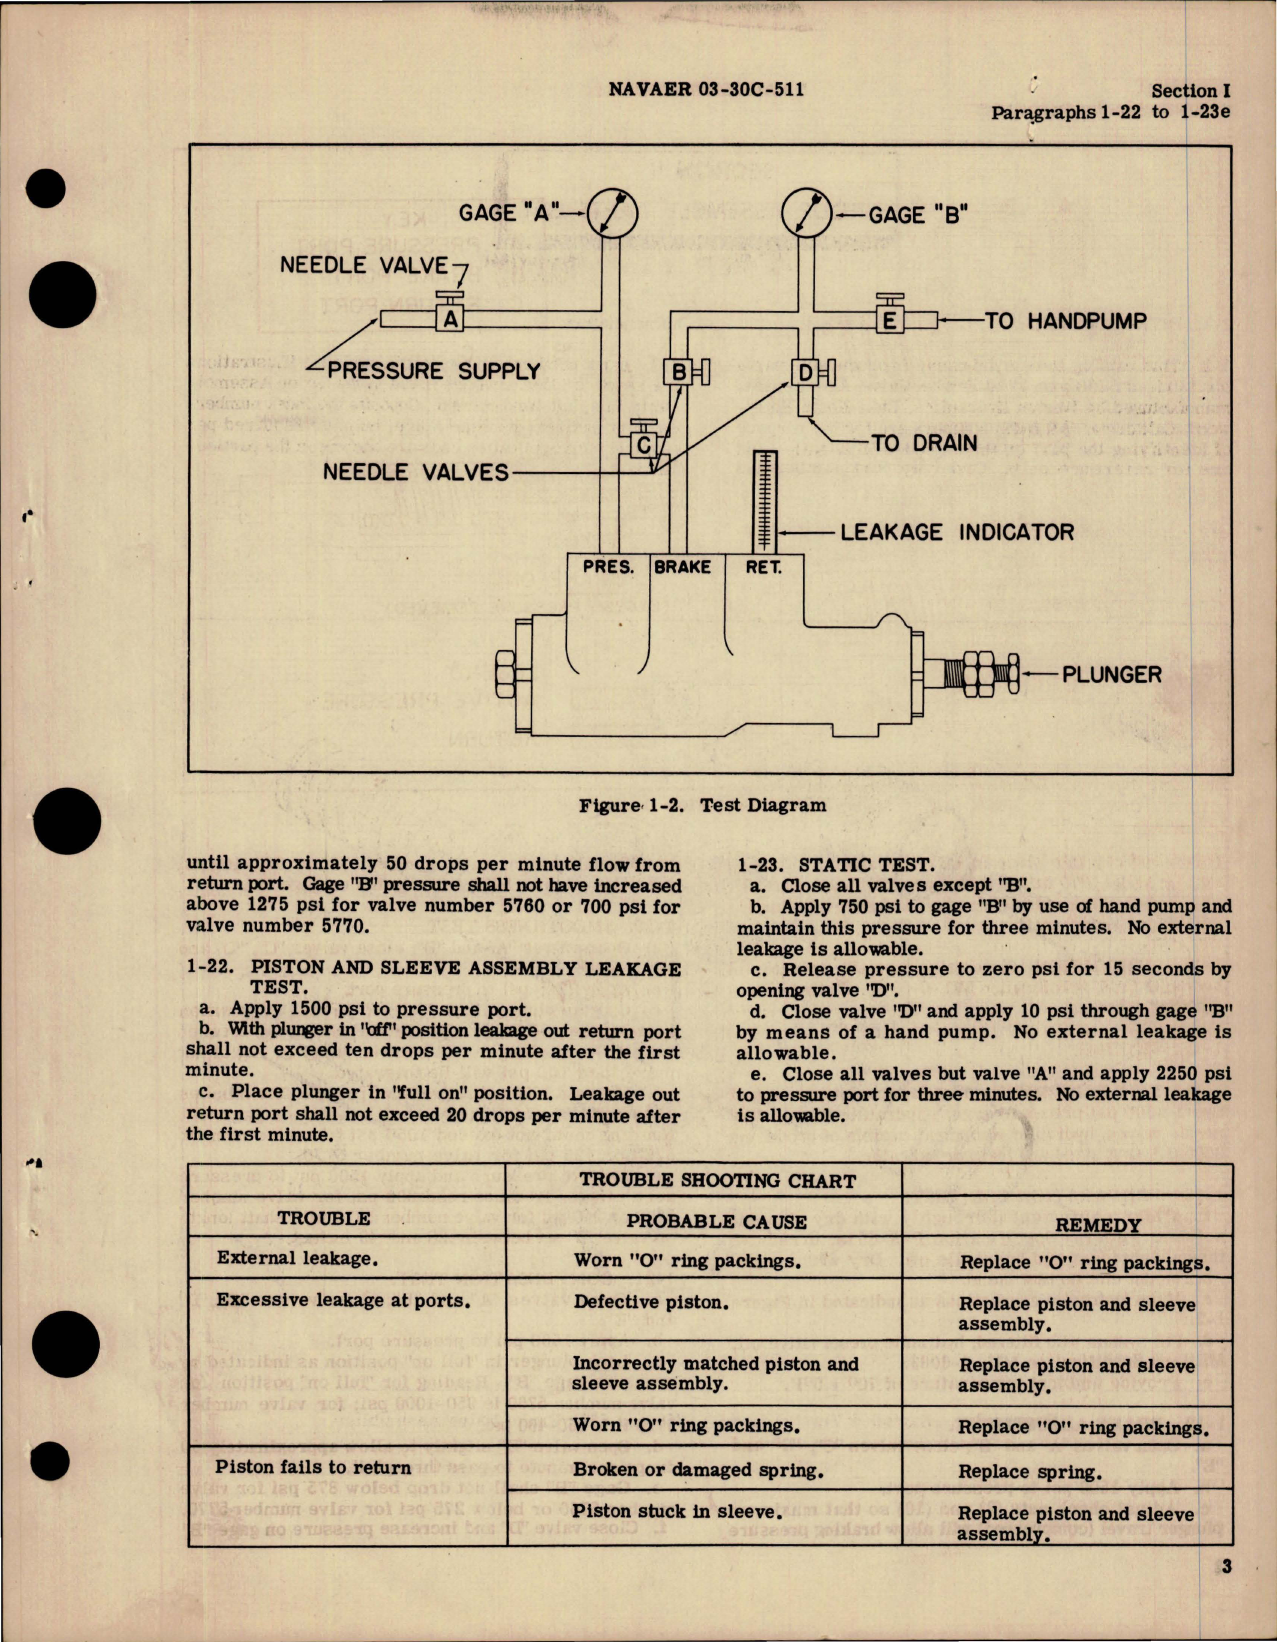 Sample page 5 from AirCorps Library document: Overhaul Instructions with Parts Catalog for Brake Valve Assemblies - Models 5760 and 5770